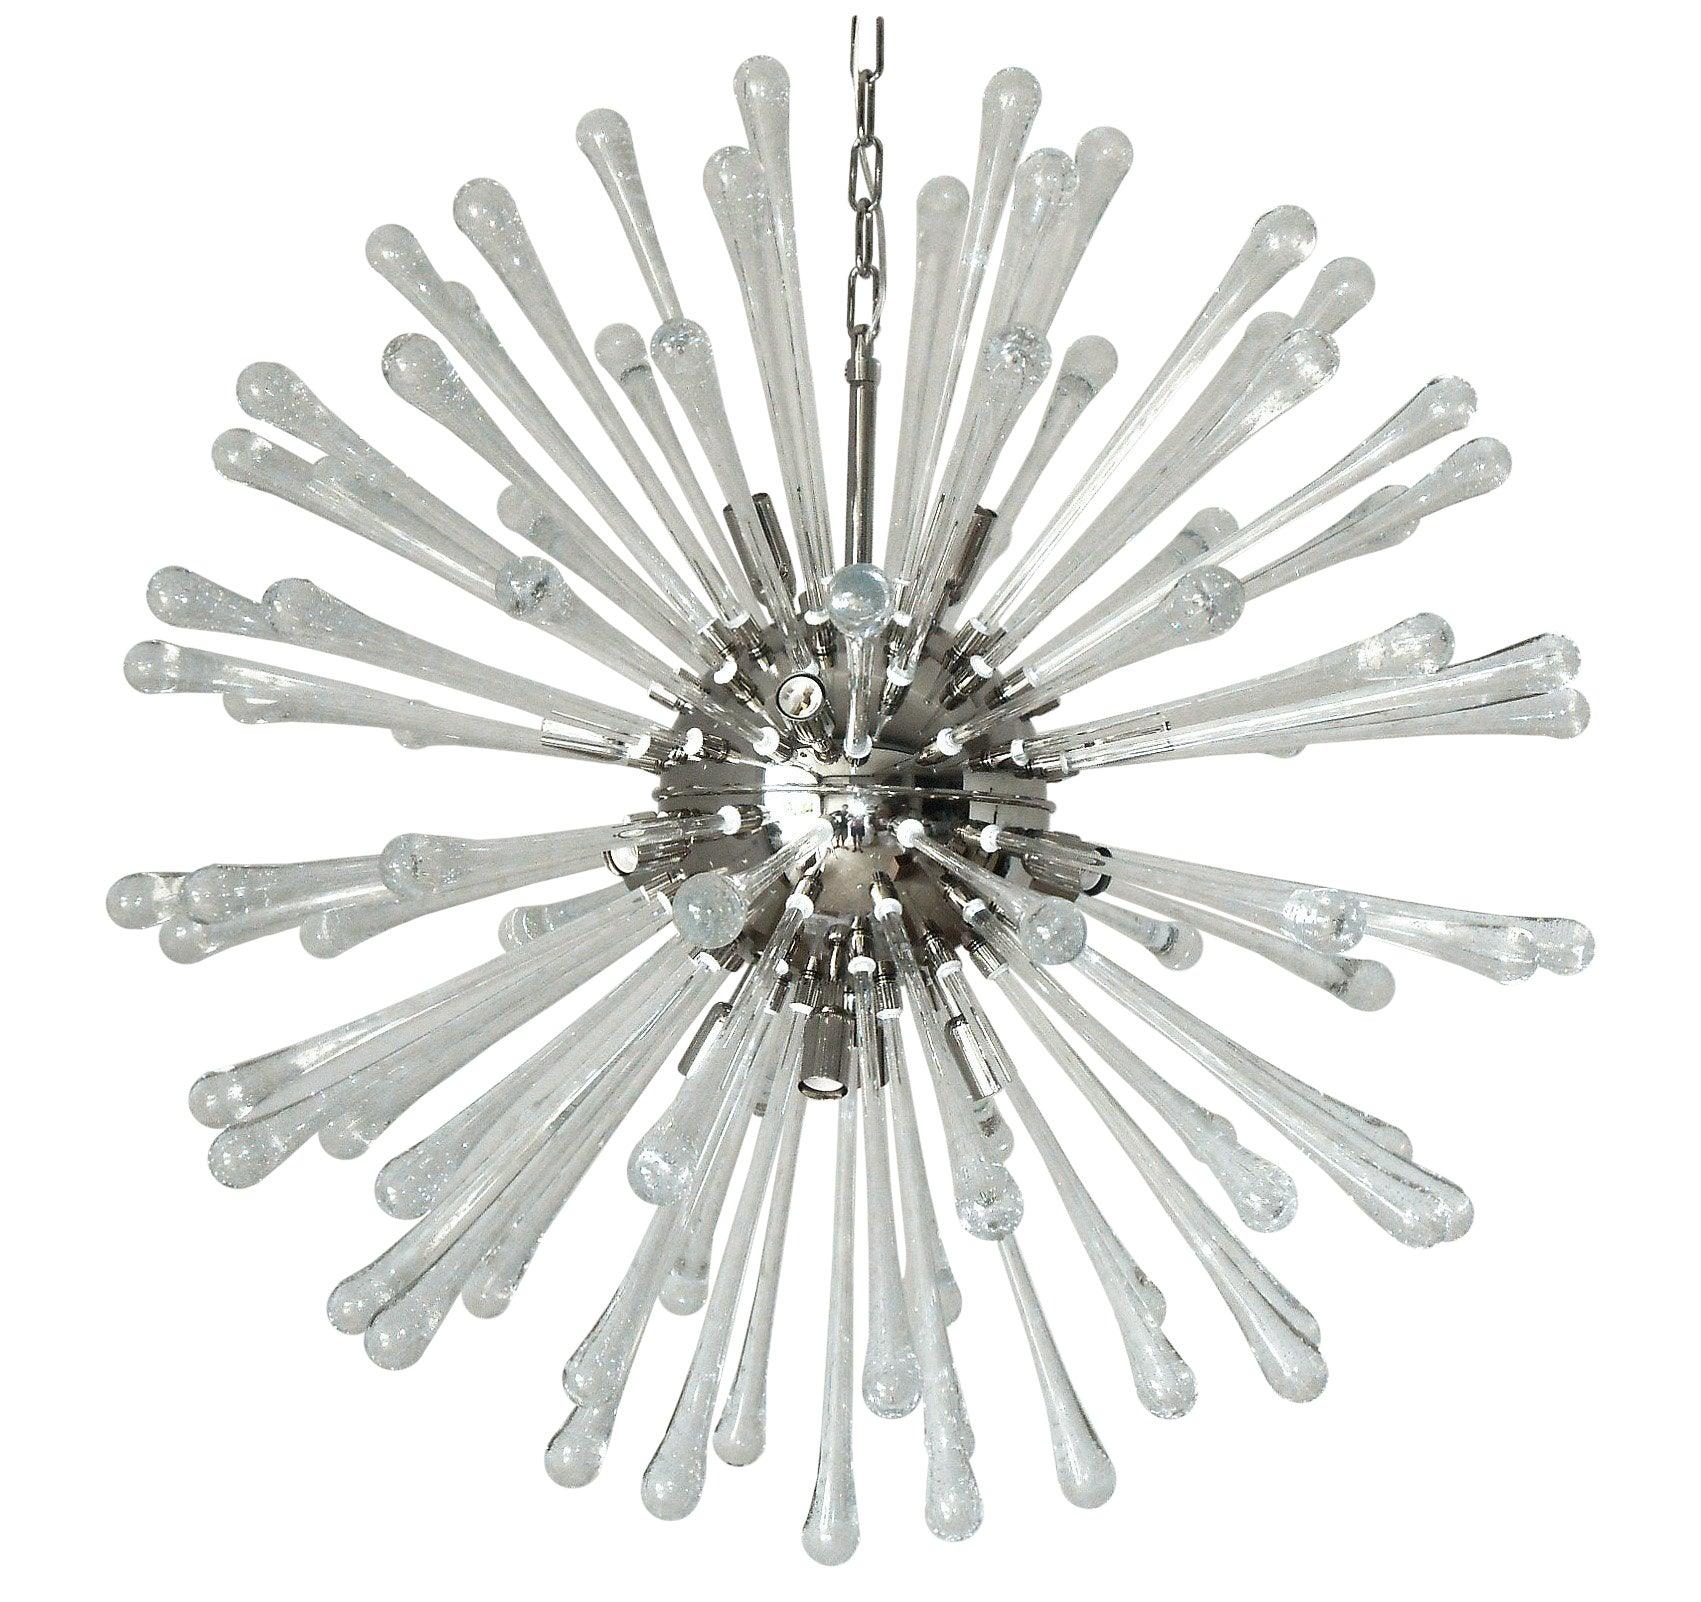 Italian modern Sputnik chandelier with clear drop shaped Murano glasses hand blown with bubbles within the glass in Bollicine technique, mounted on chrome frame / designed by Fabio Bergomi for Fabio Ltd / made in Italy
16-light / E12 or E14 type /